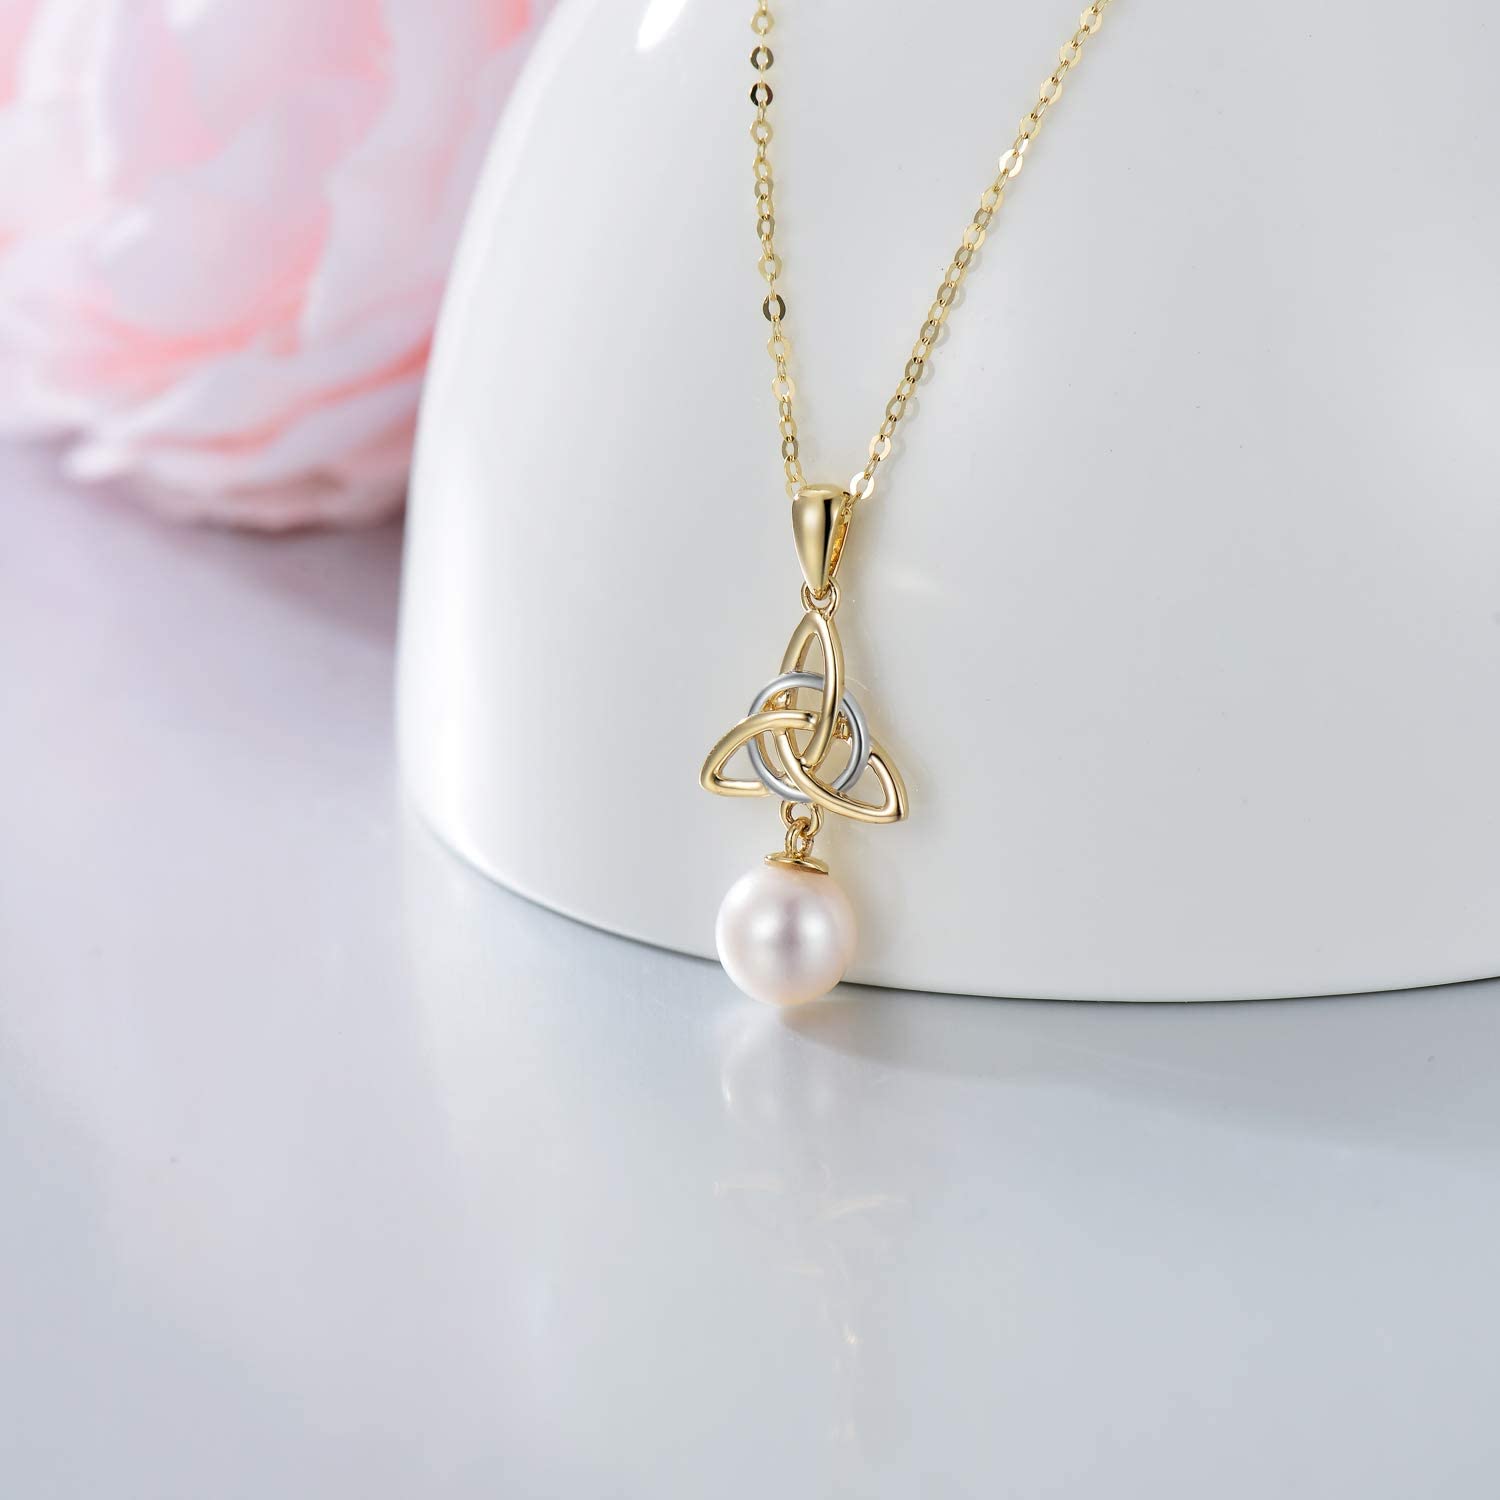 B08NDMQ7GF SISGEM 14K Solid Yellow Gold Good Luck Irish Celtic Knot  Necklace with Pearl,Trinity Knot Pendant Charm Necklace Christmas Birthday  Gift 